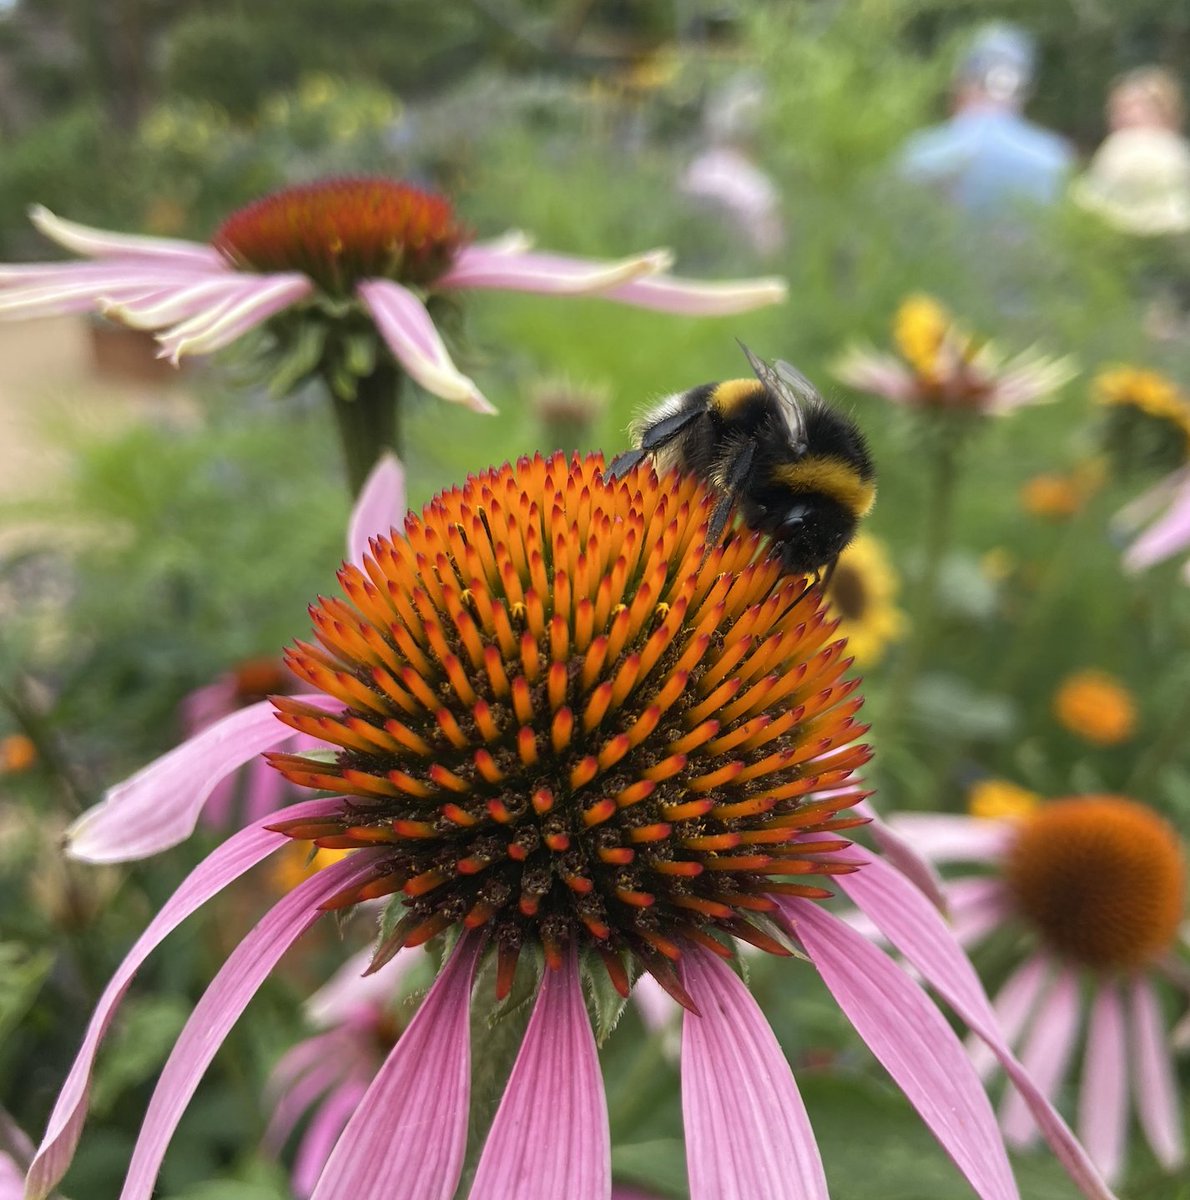 Are you passionate about #pollinators? Could you be a #lab wizard? Come and join an amazing #research project examining the impact of pesticide reduction on insects in the #ChannelIslands as a lab #technician at @BristolUni. For more details and to apply: jobs.ac.uk/job/DFR215/res…